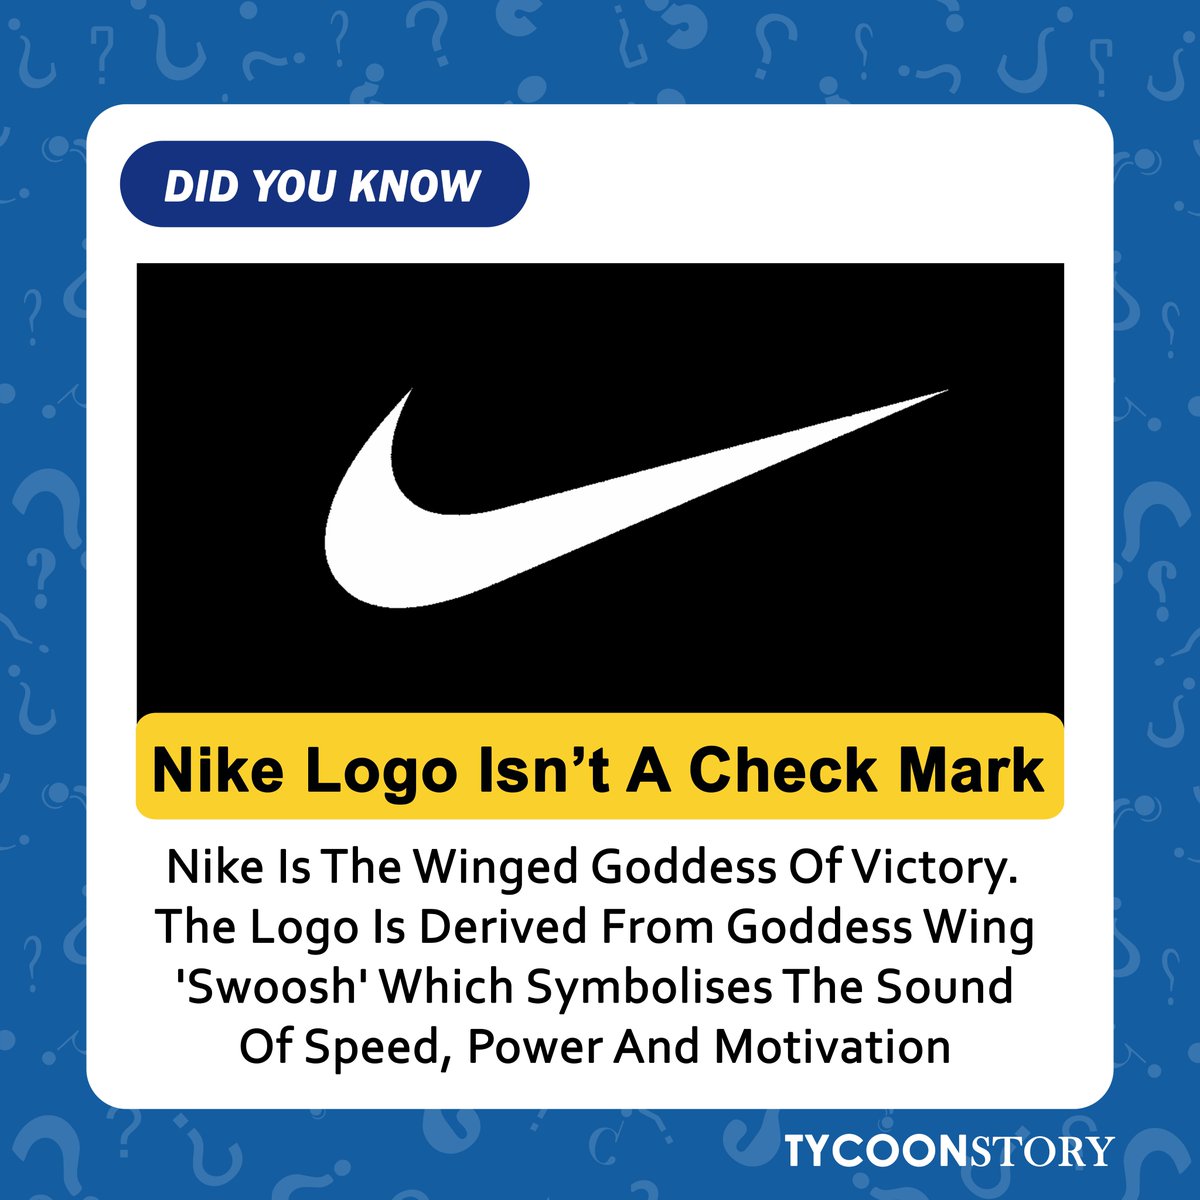 #DidYouKnow 

#nikesymbol #GoddessOfVictory #SpeedAndPower #dreams #Motivation #WingedVictory #swiftness #FindYourGreatness #iconicLogo #ambition #ImpossibleIsNothing #NikeLegend #NikeInnovation #inspiration #Empowerment